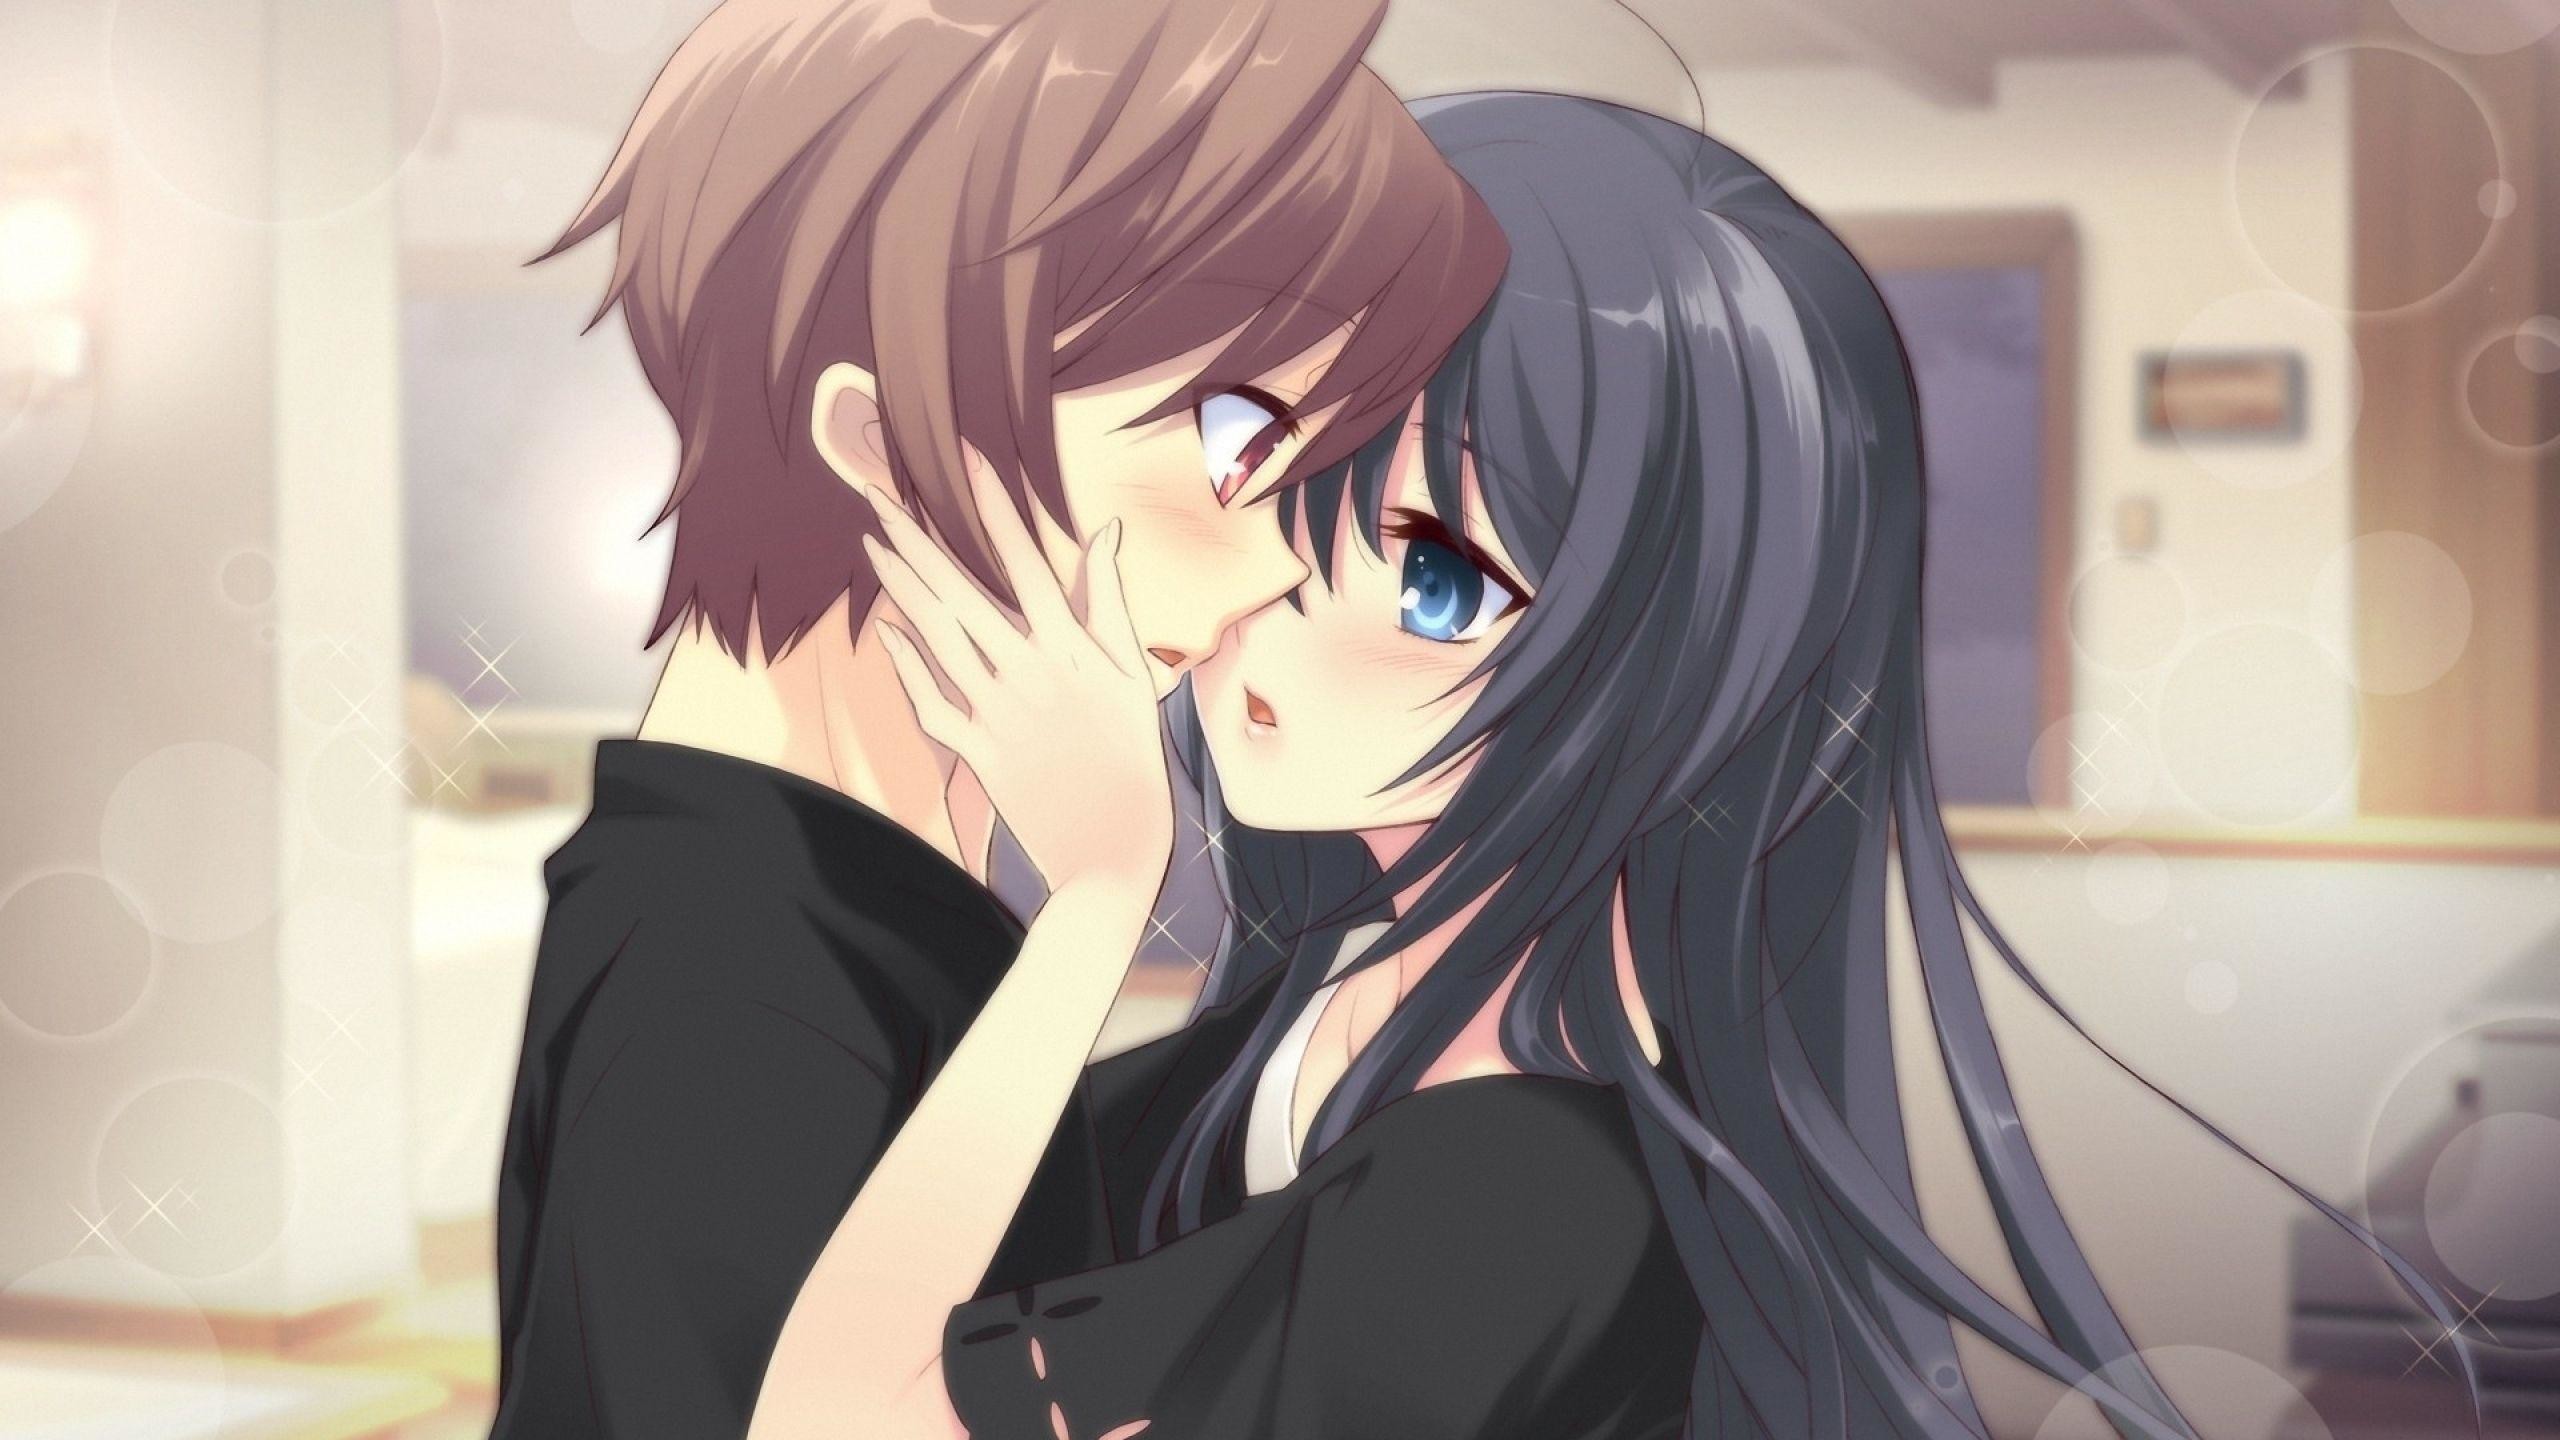 2560x1440 Cute Anime Couple Wallpaper | Download Wallpapers